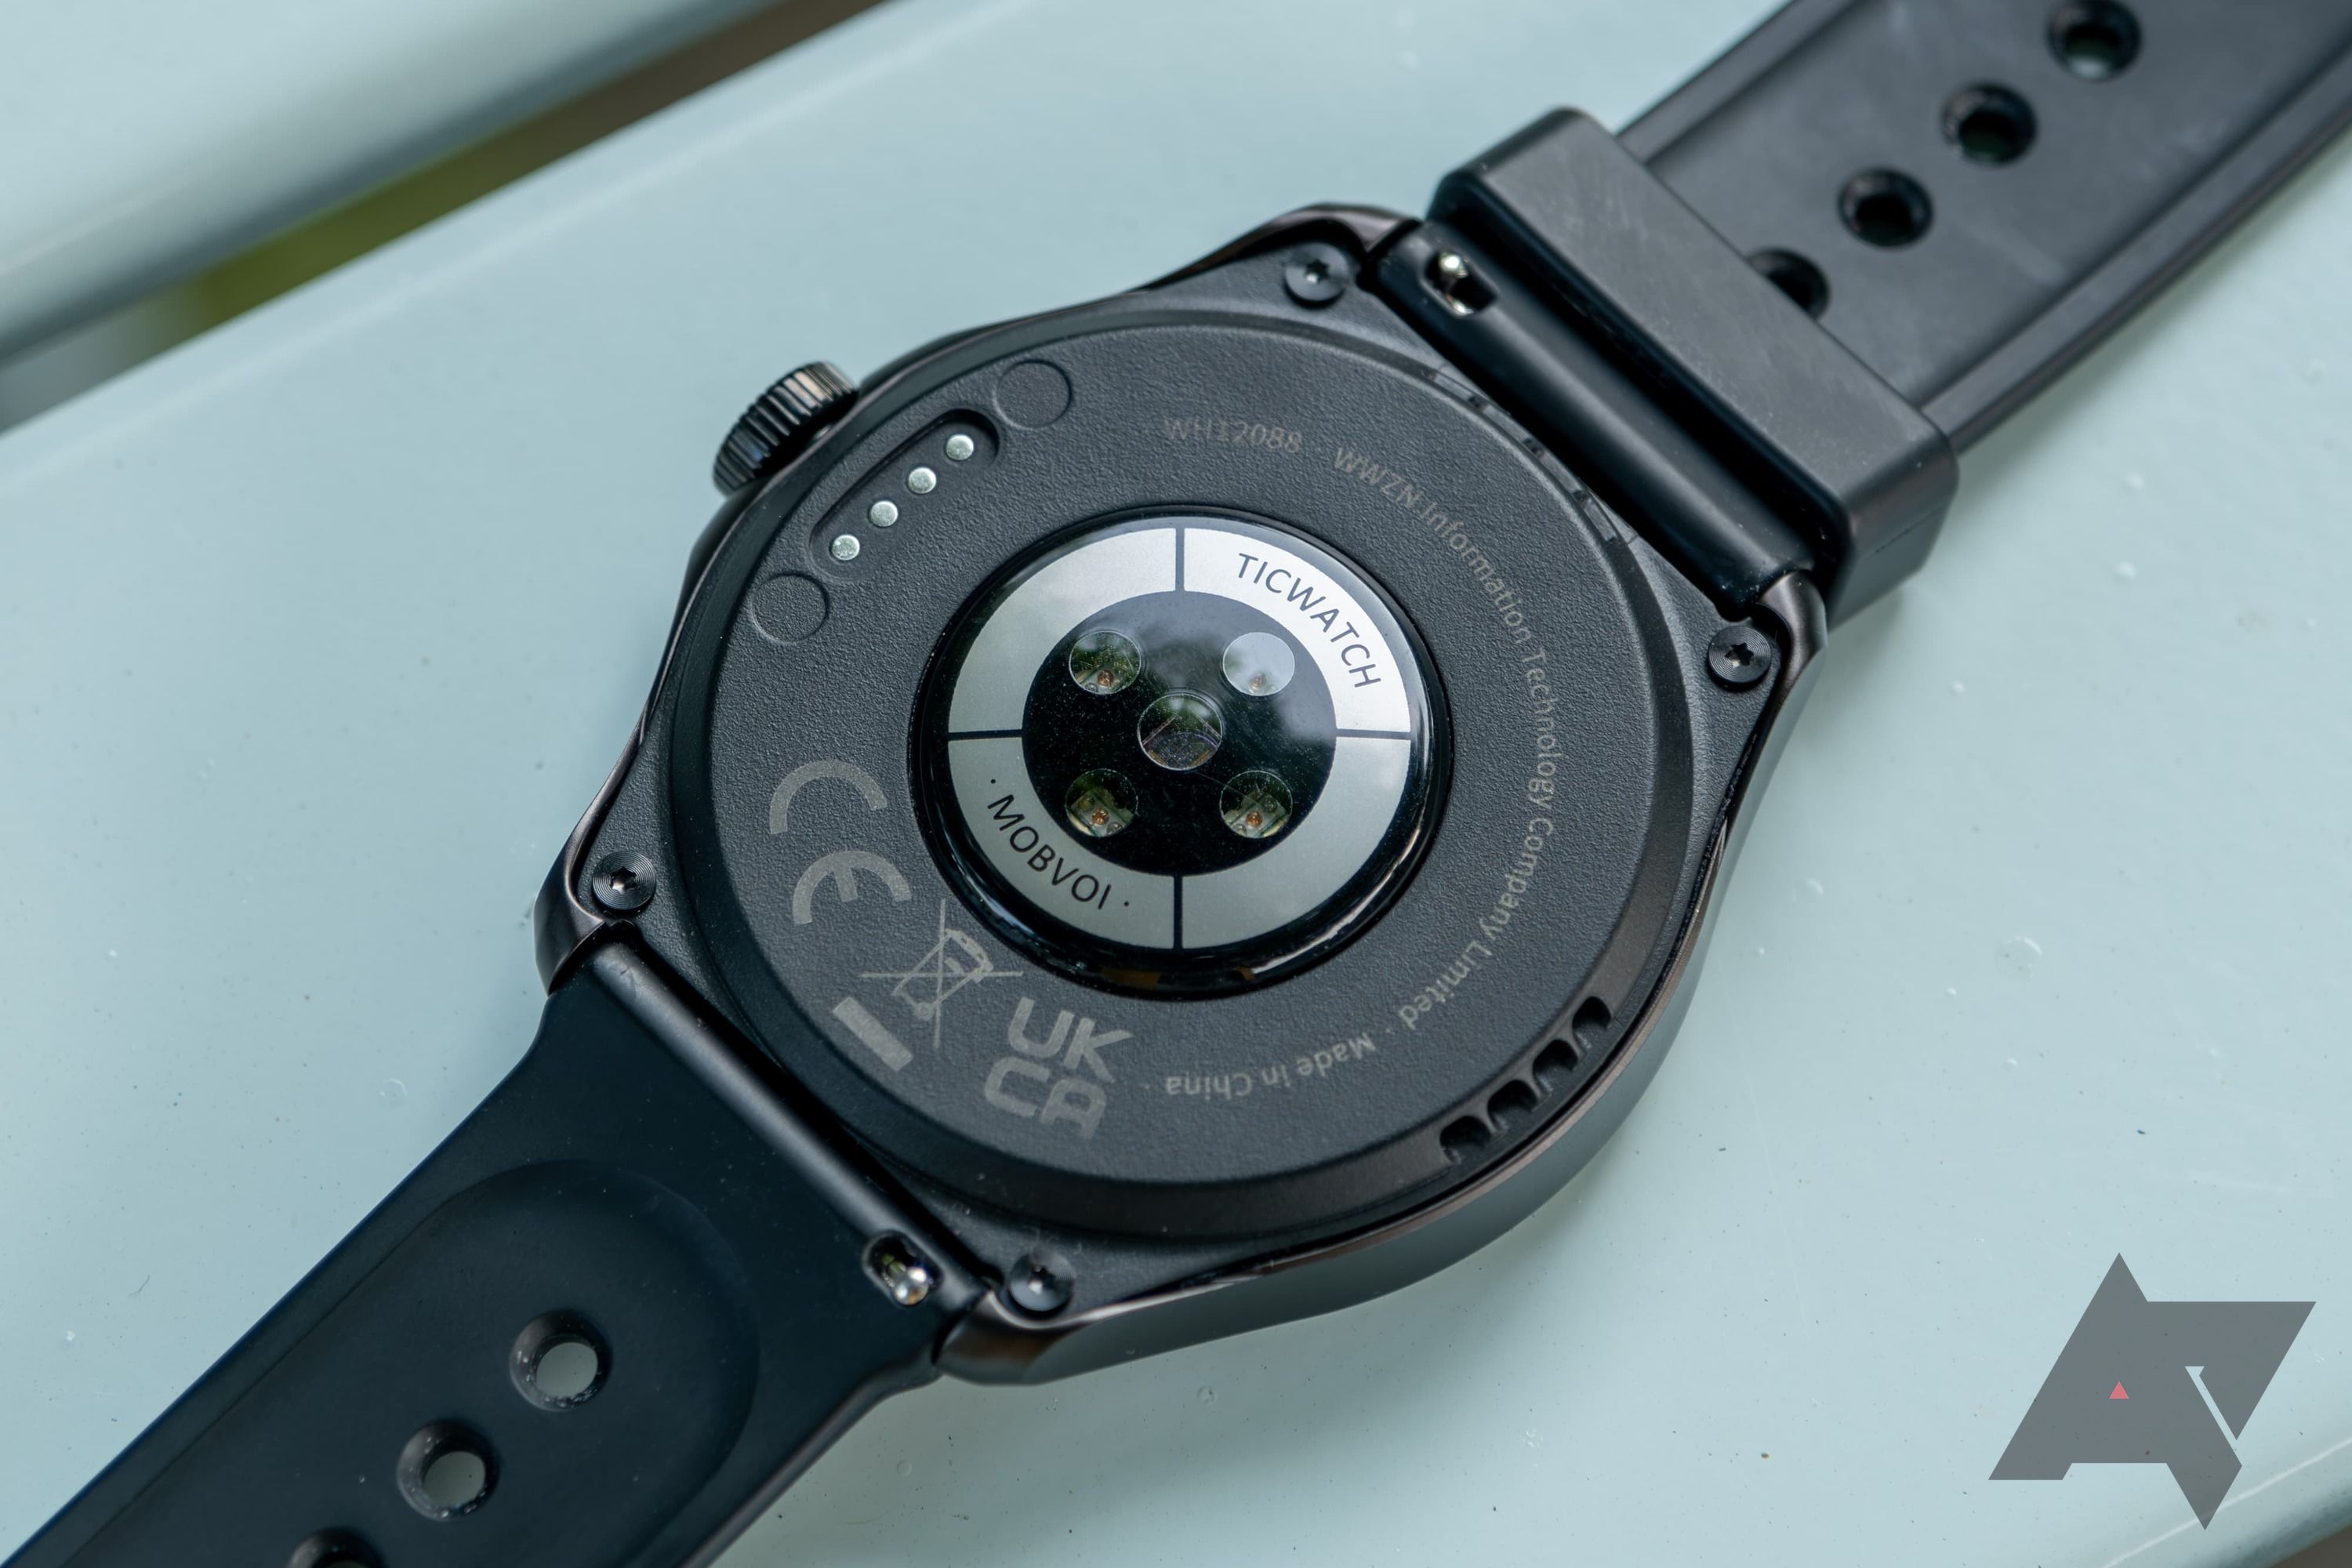 Mobvoi TicWatch Pro 5 vs Amazfit T-Rex Ultra: Which long-lasting smartwatch  is right for you?